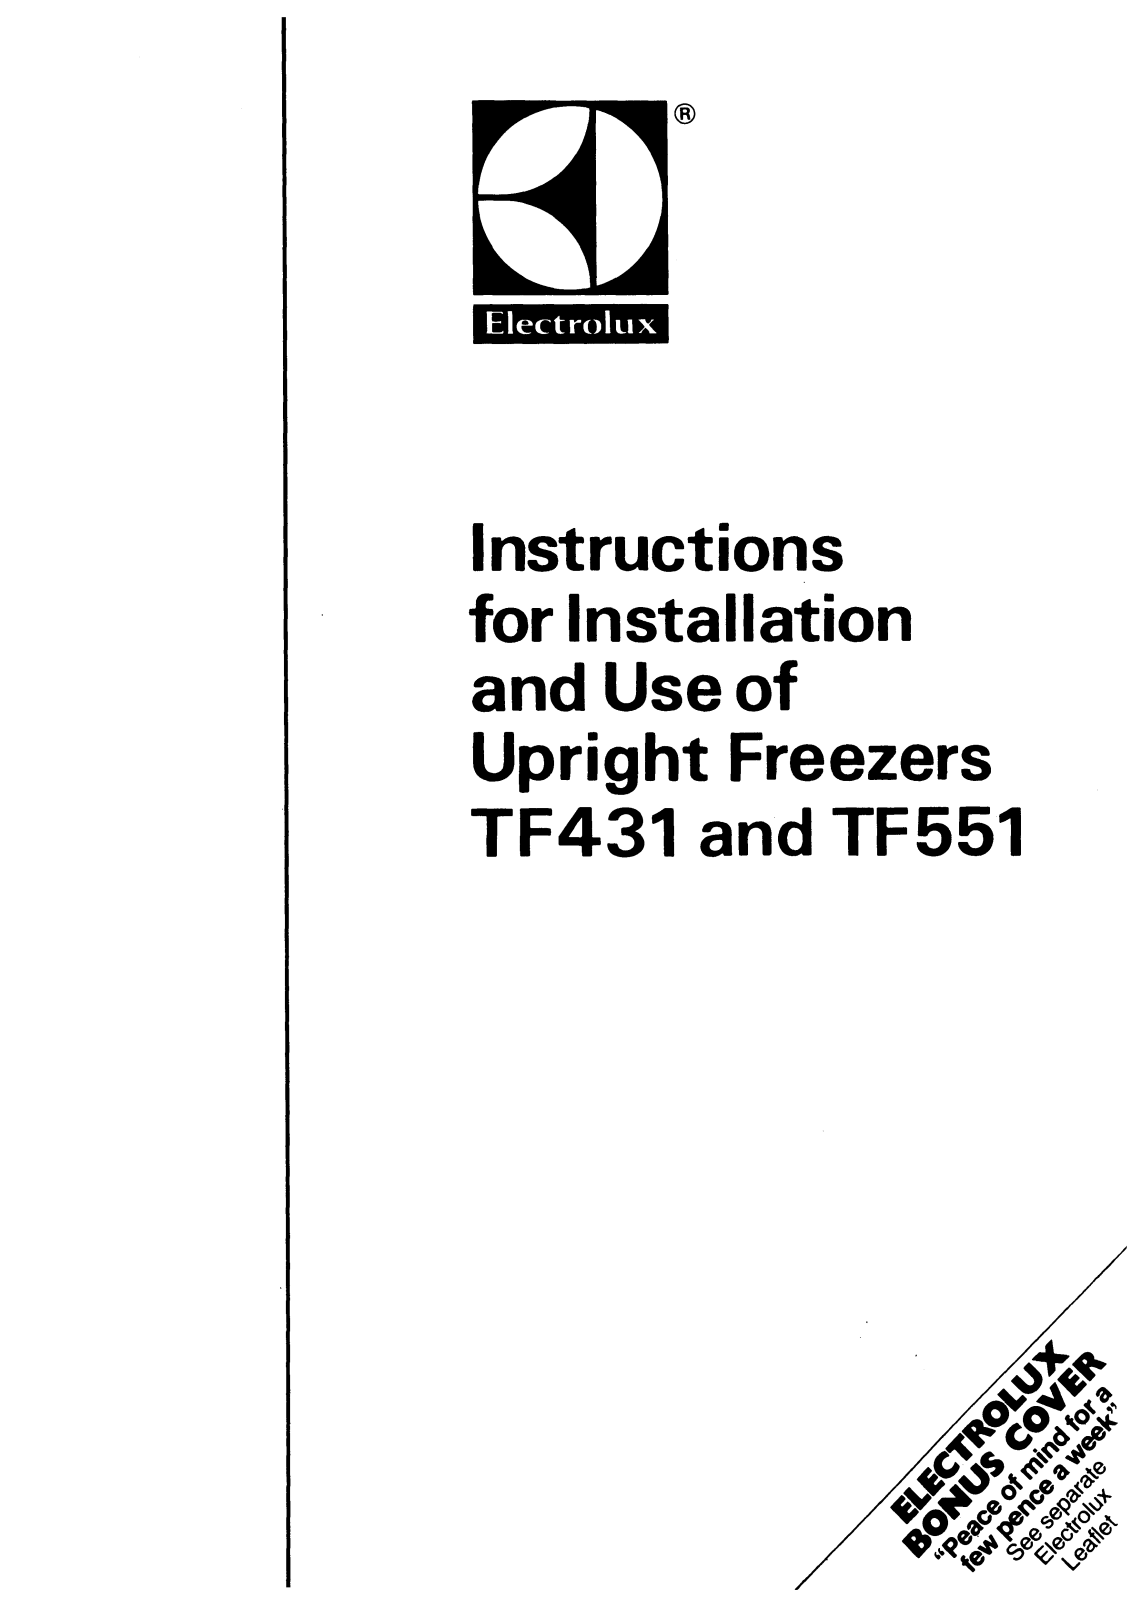 Electrolux TF551 User Guide